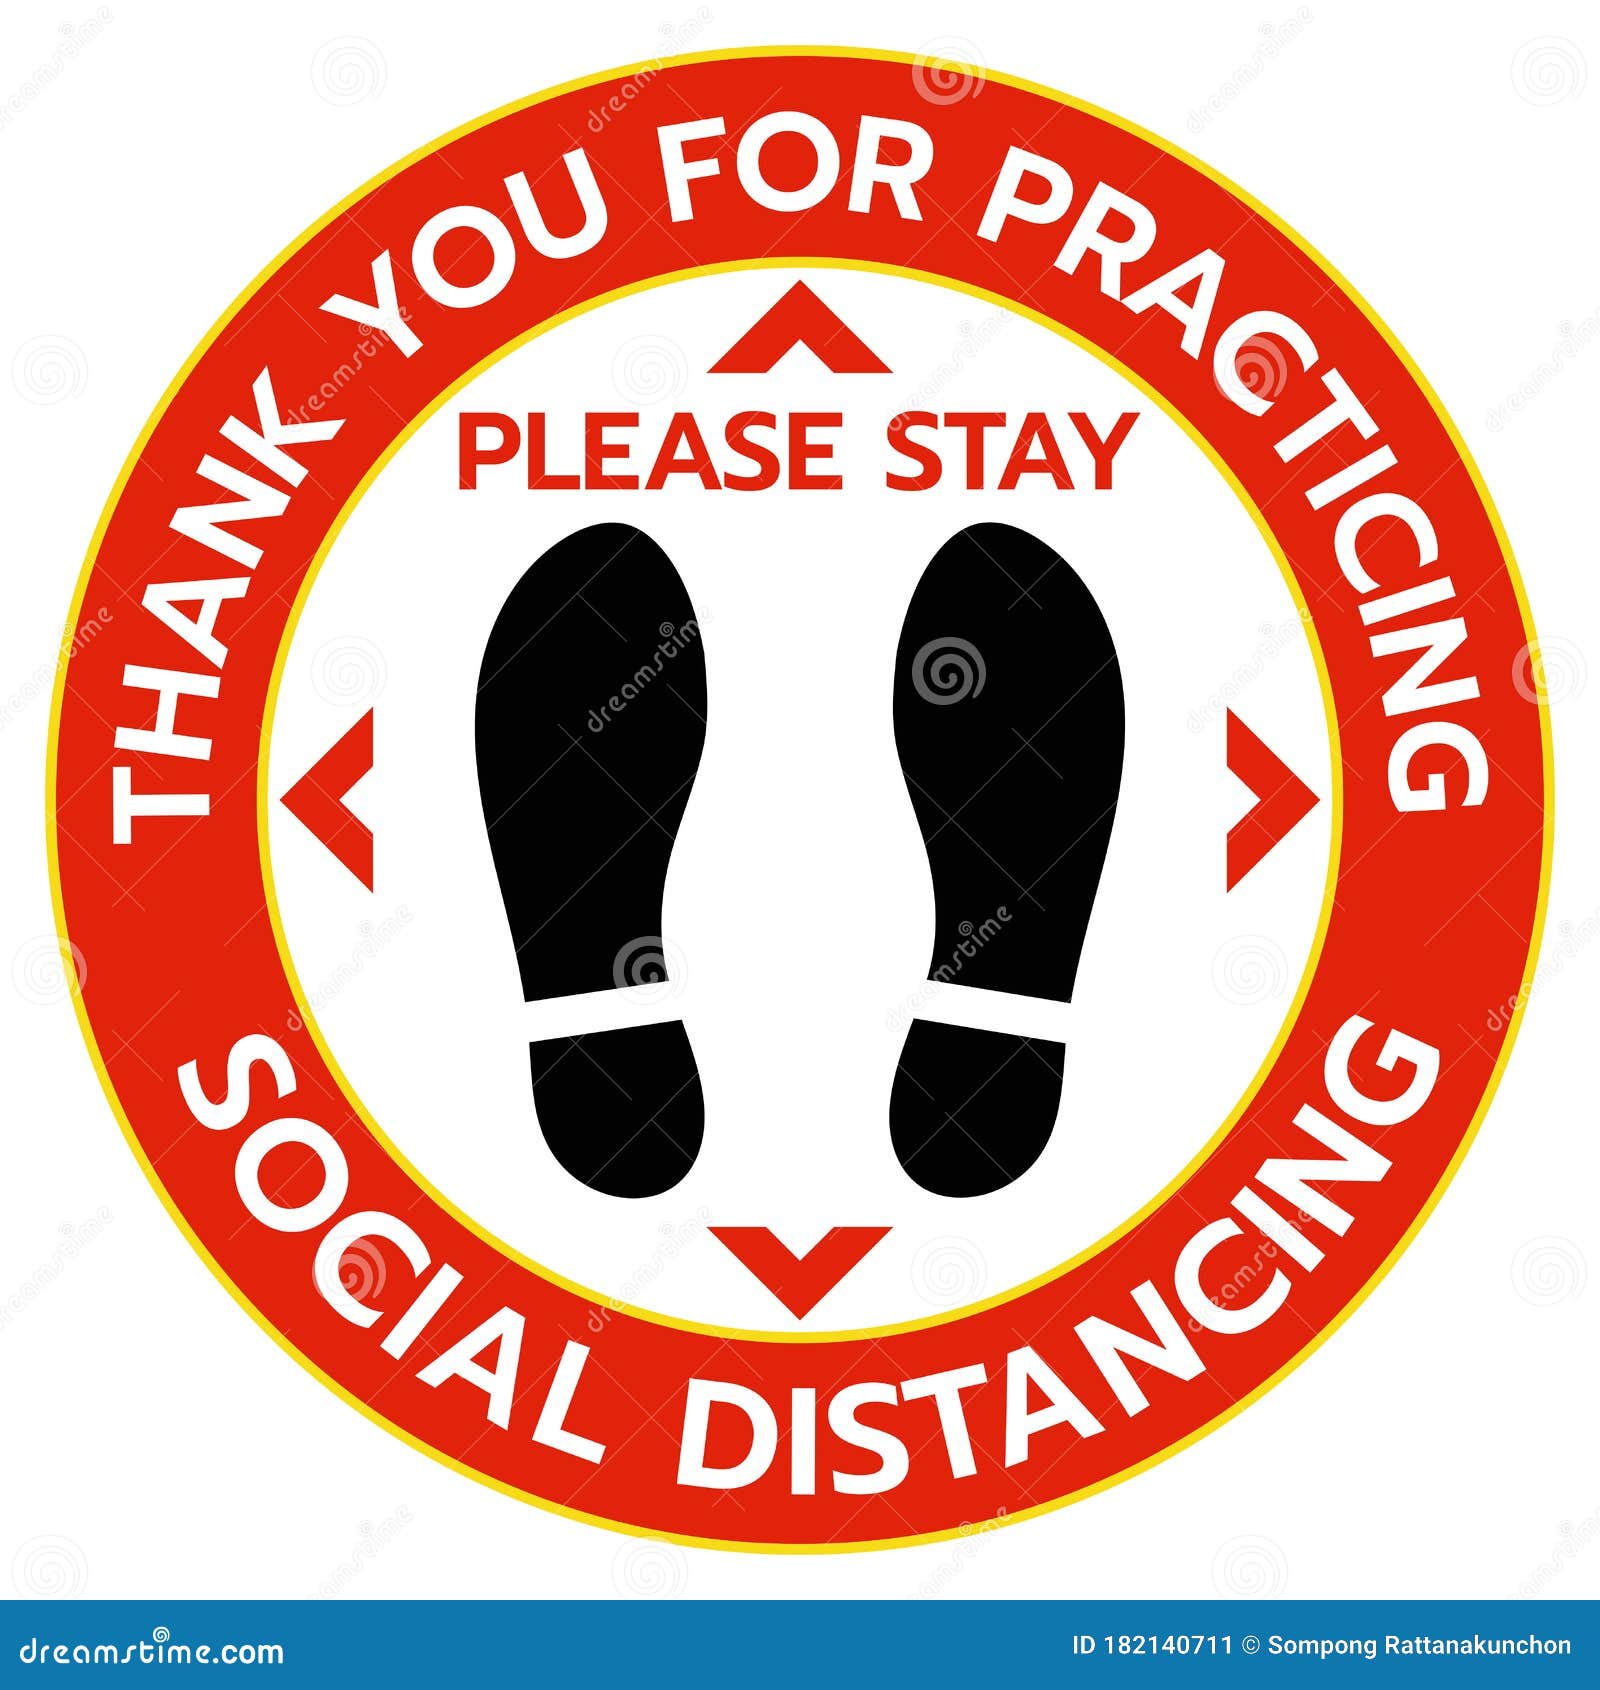 5x 2 metre Please Wait Here Stand Here Social Distance Floor Stickers